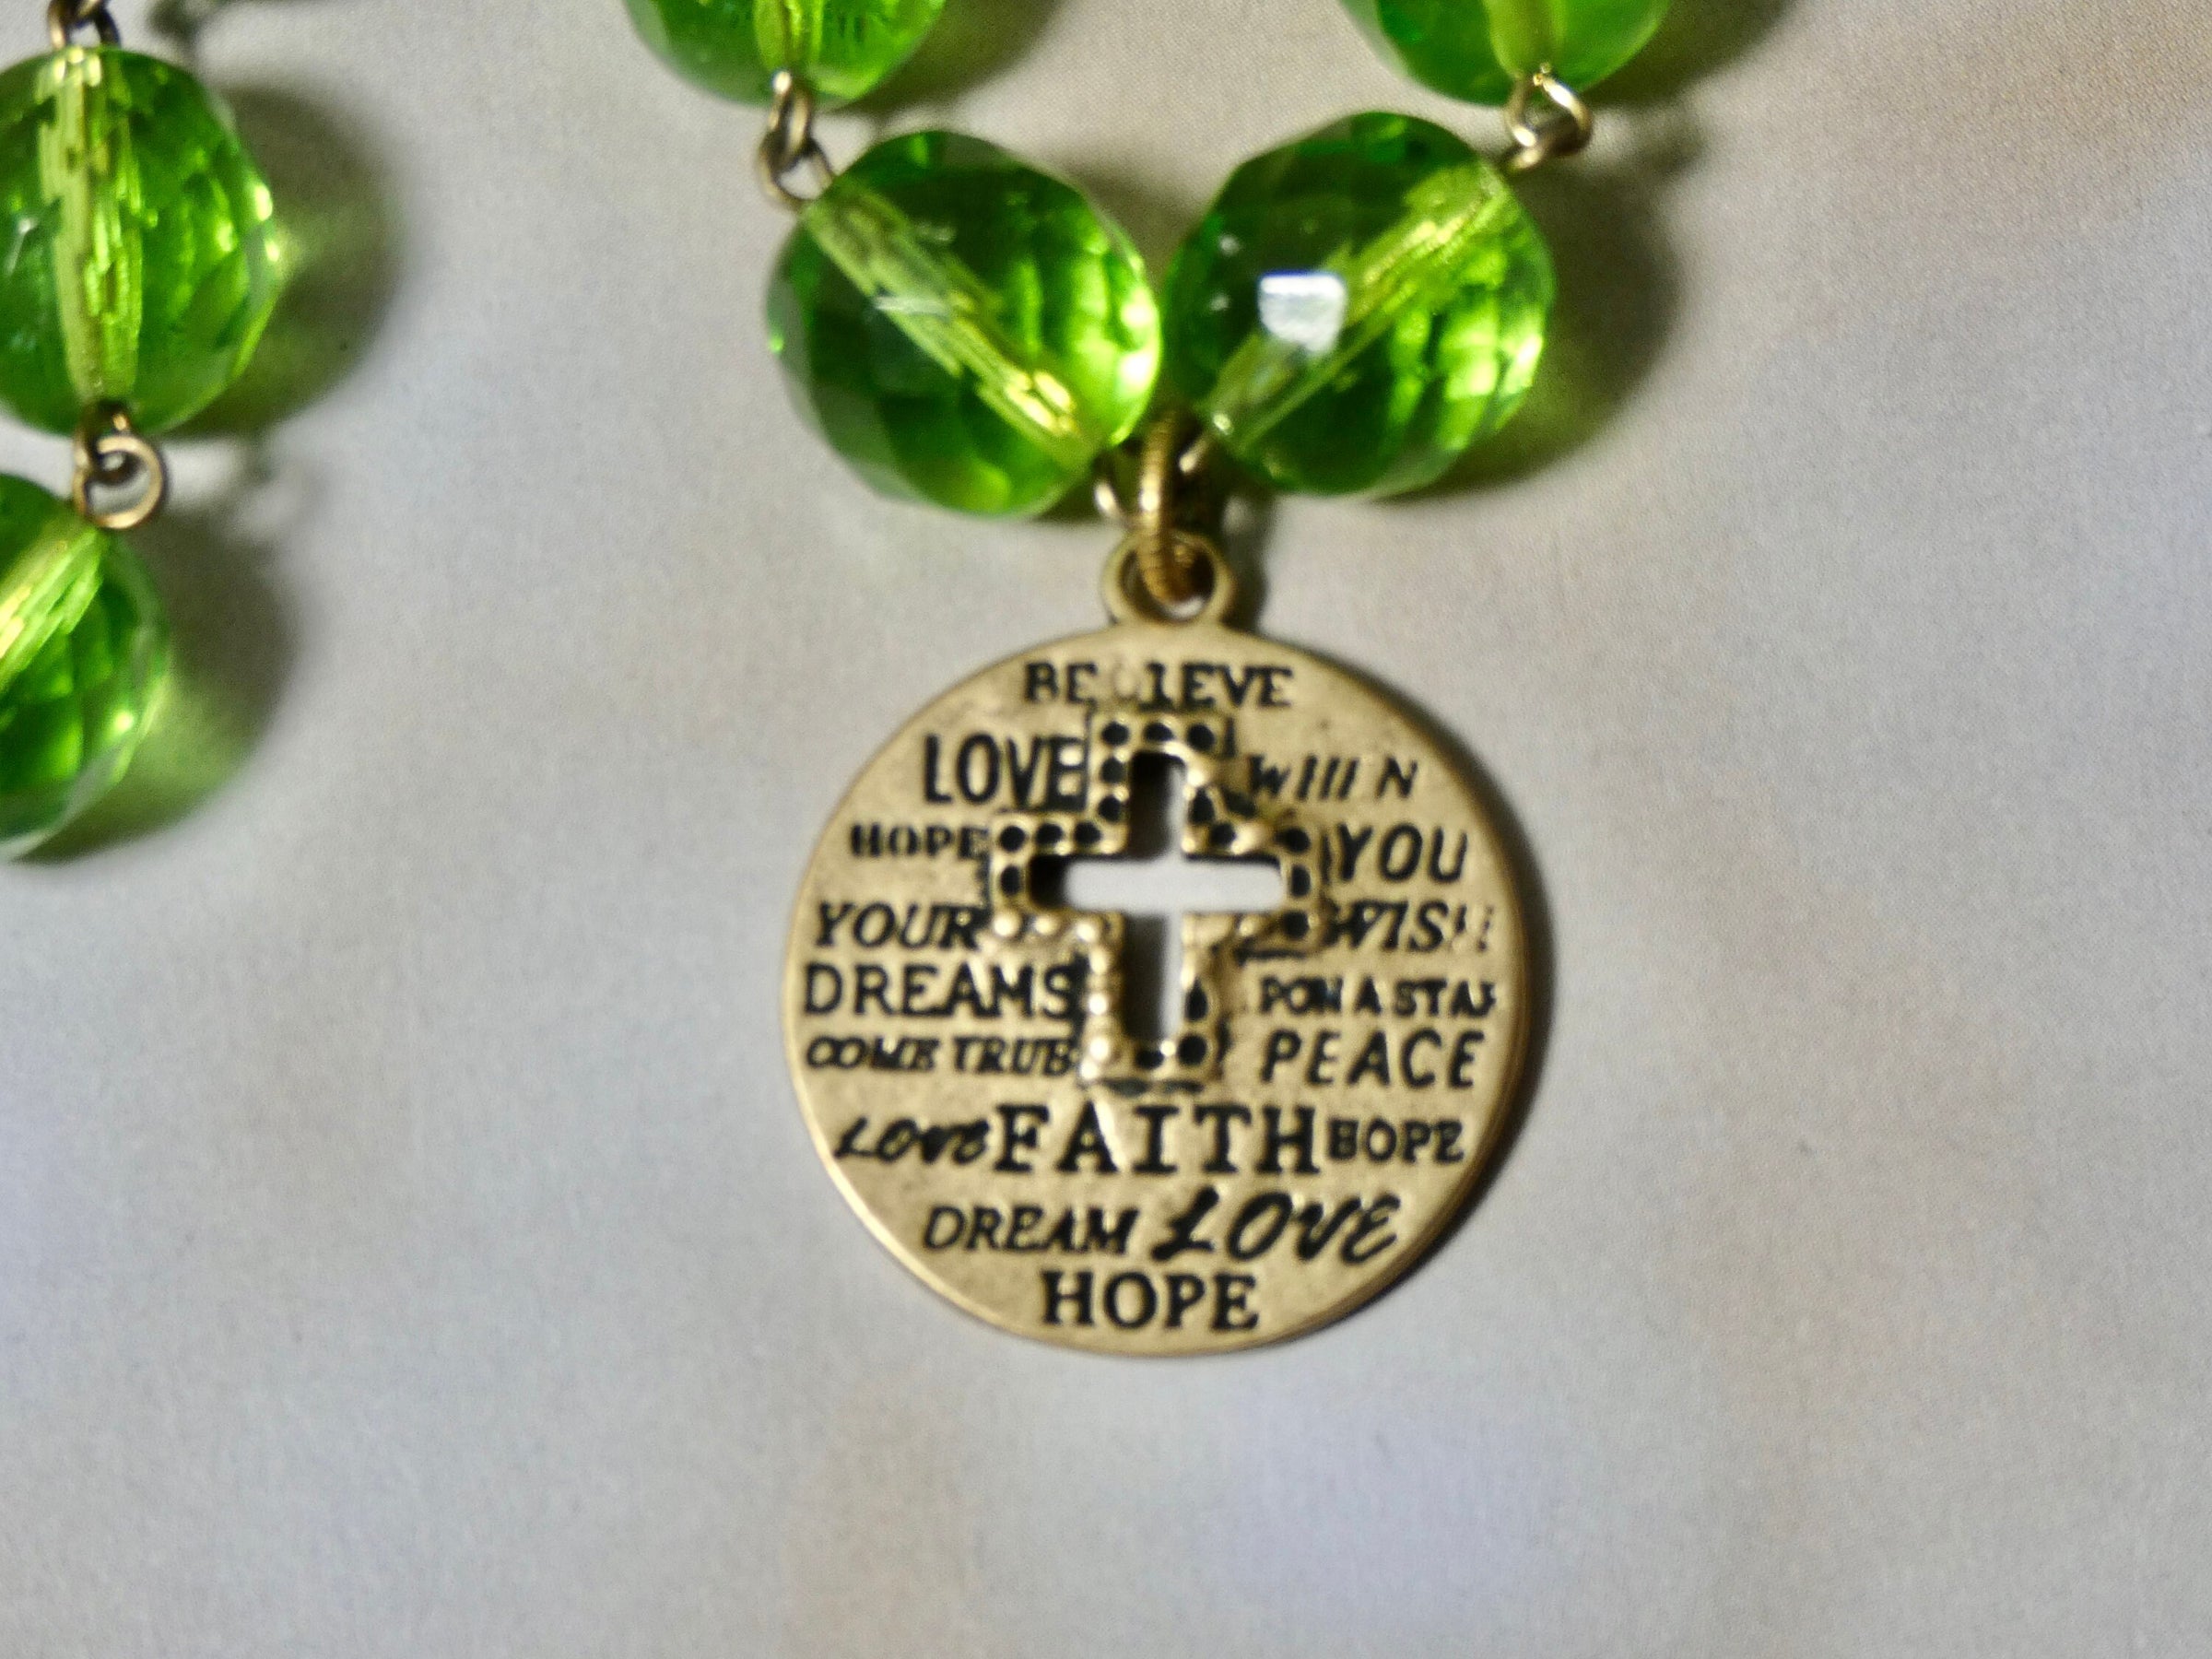 Cross Necklace with green rosary bead chain